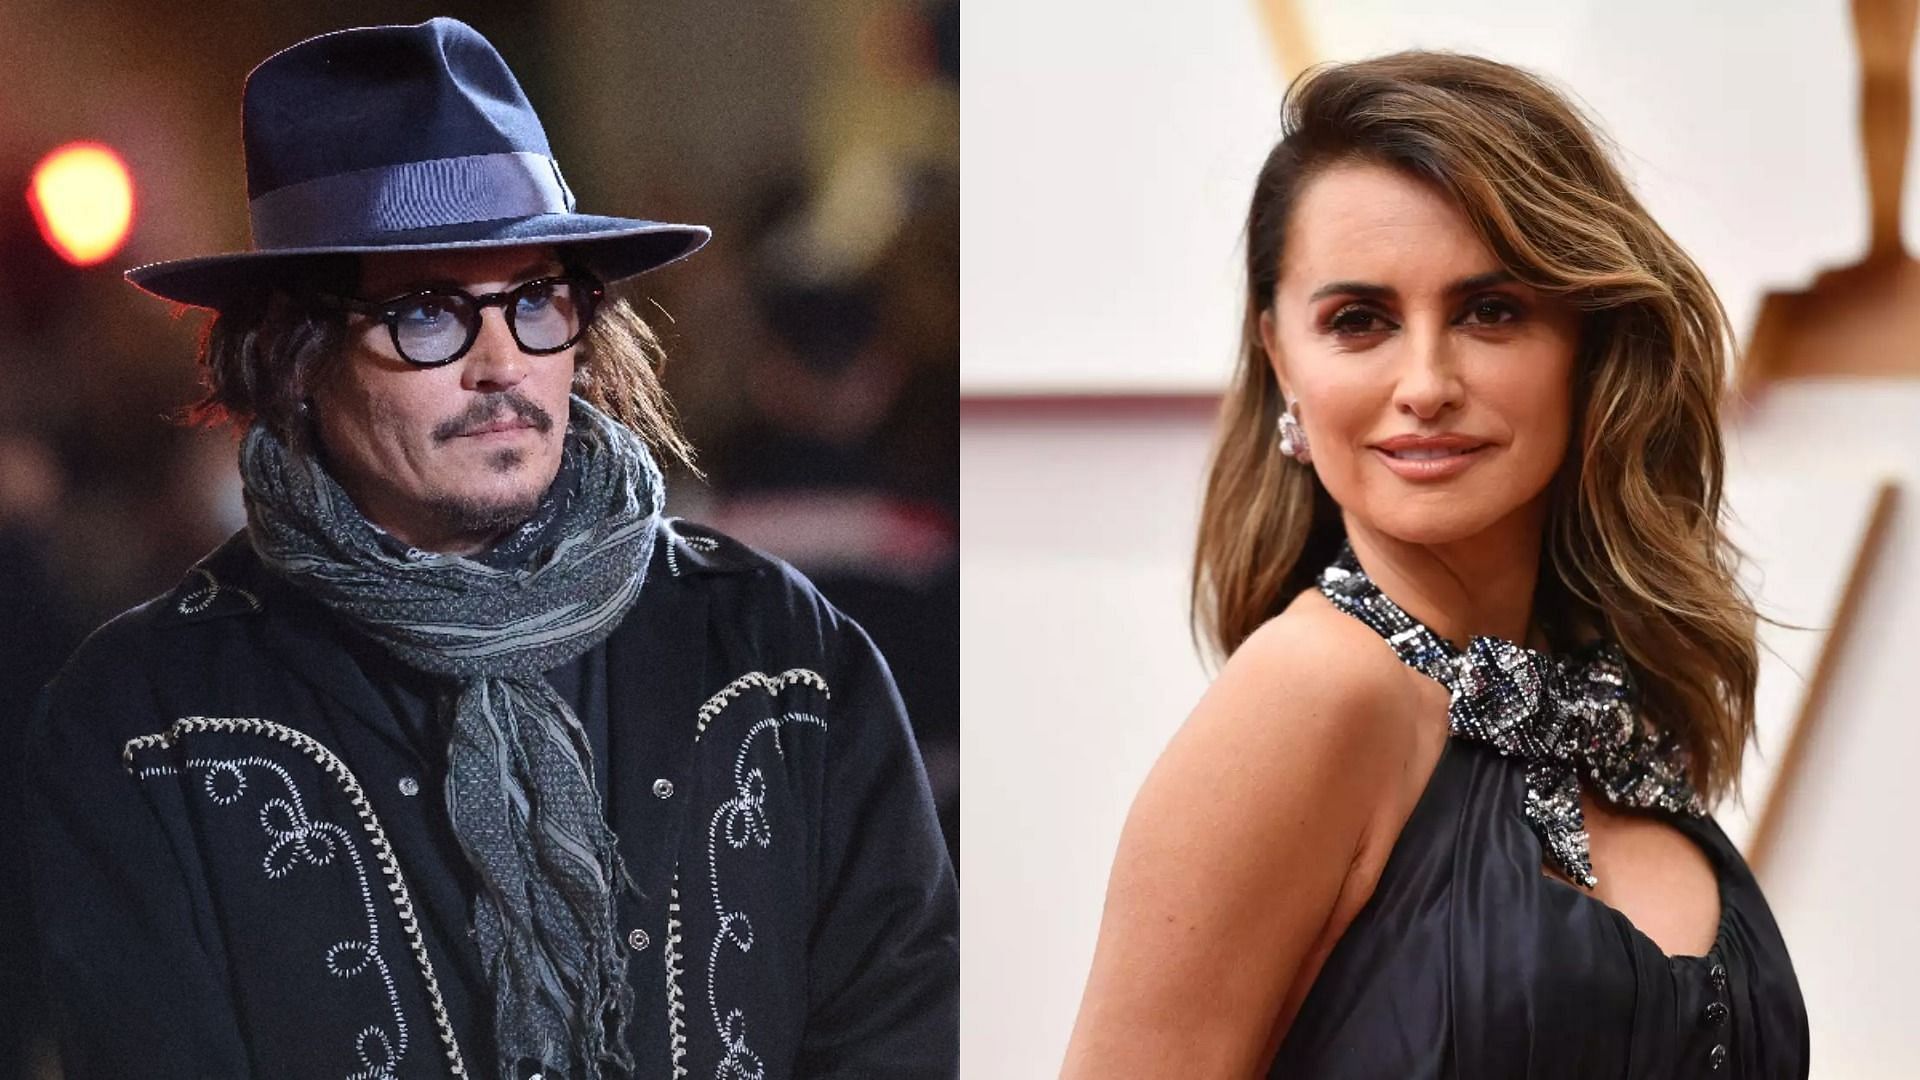 Penelope Cruz revealed that Johnny Depp helped her through her first six months of pregnancy when they were shooting for Pirates of the Caribbean. (Image via Getty Images/Angela Weiss/Vittorio Zunino Celotto)